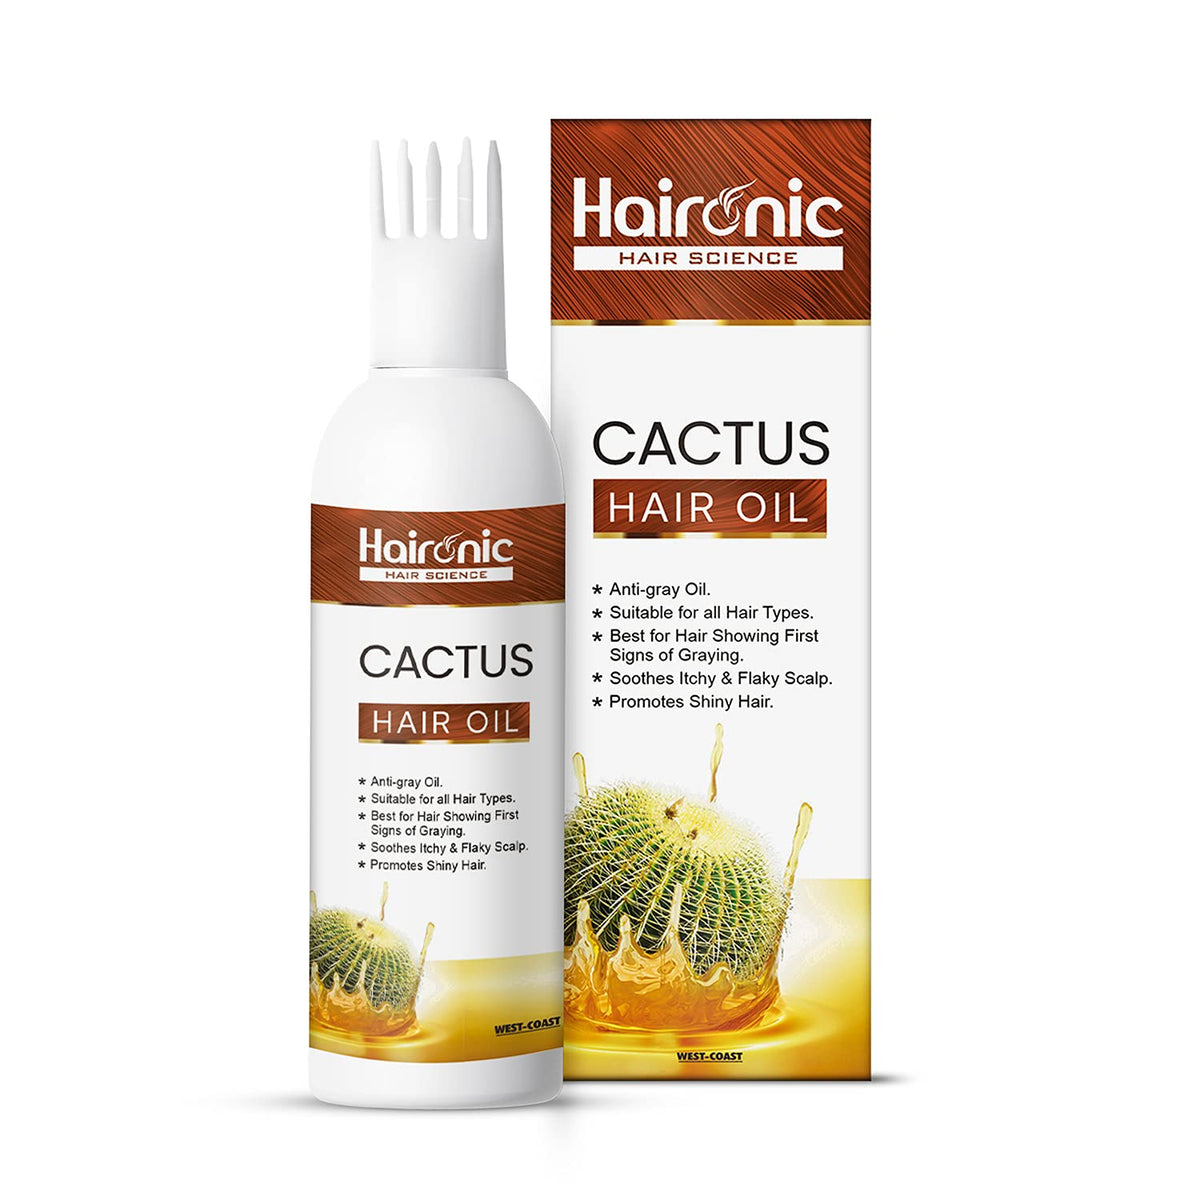 Haironic Hair Science Cactus Hair Oil | Promotes Shiny Hair |Non-Sticky & Suitable for All Hair Types – 100ml (Pack of 10)